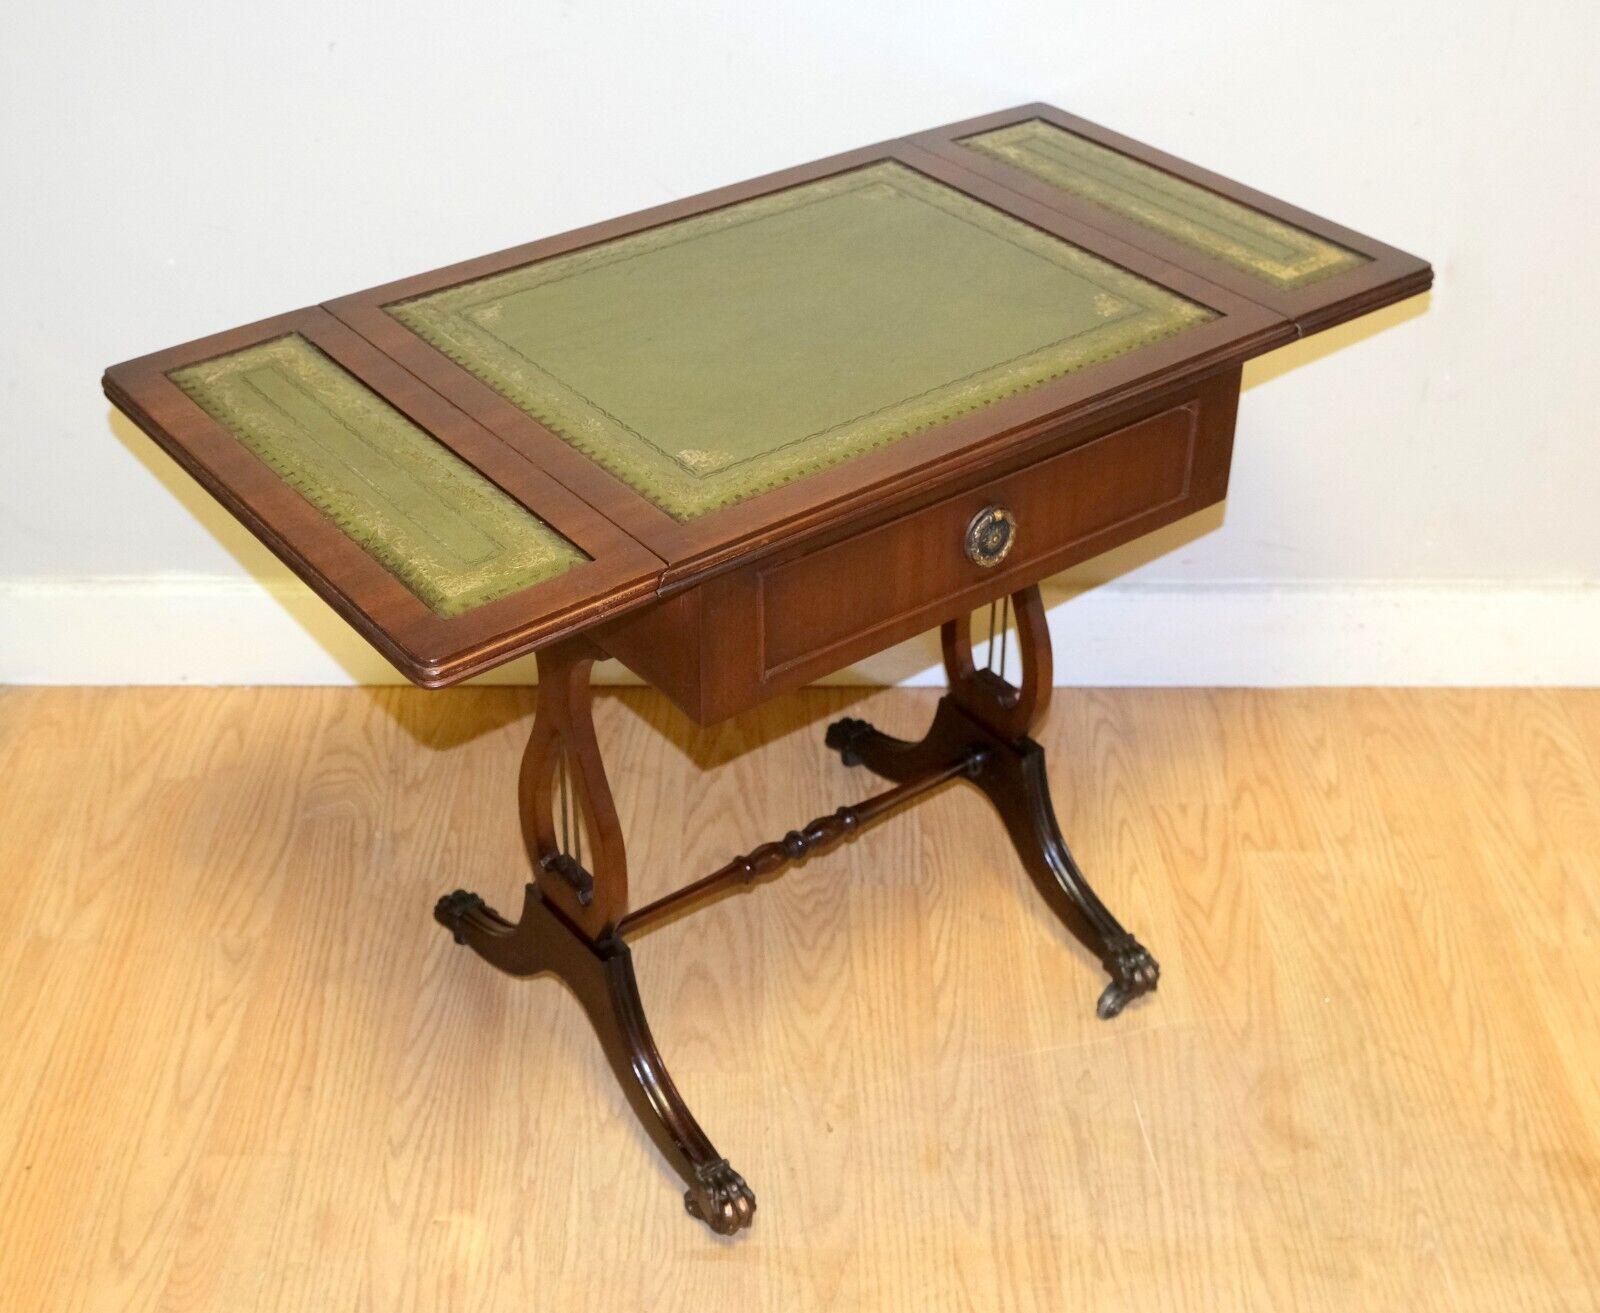 We are delighted to offer for sale this lovely Bevan Funnell brown mahogany extendable green leather top side end lamp card table.

A well made, rich Mahogany colour and good looking side table from the well known British furniture maker, Bevan